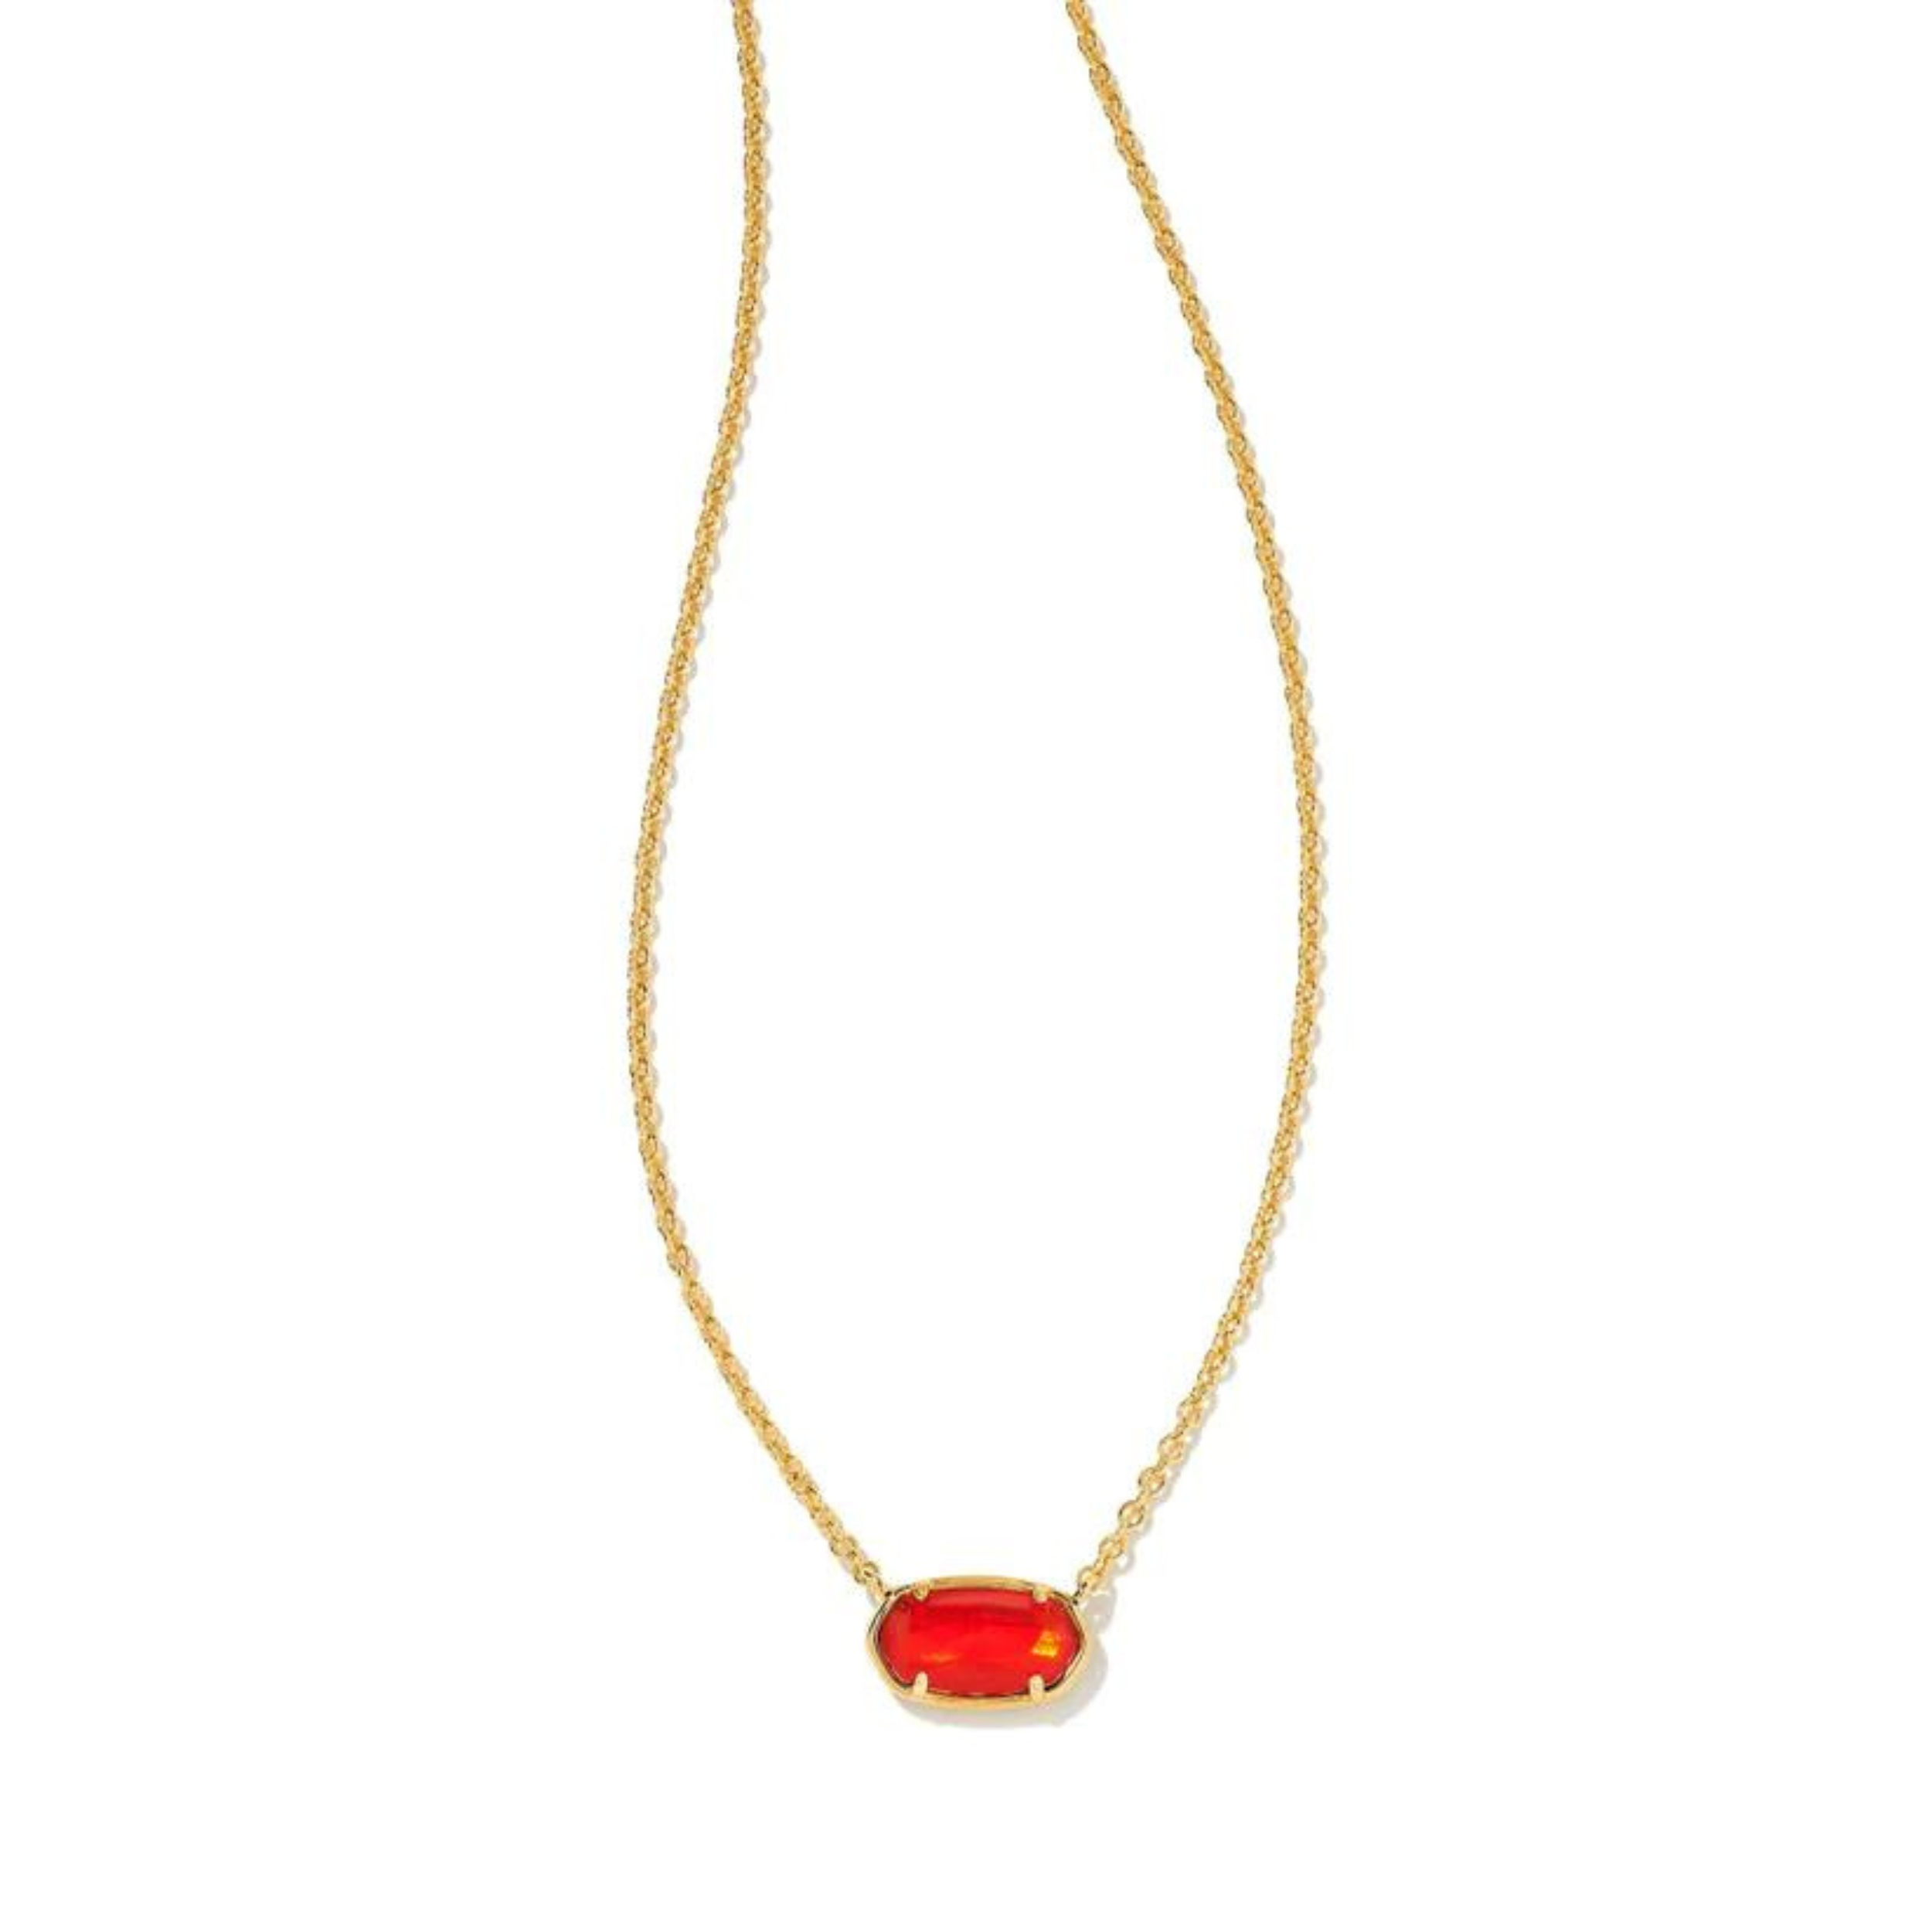 Gold chain necklace with a red illusion pendant pictured on a white background.